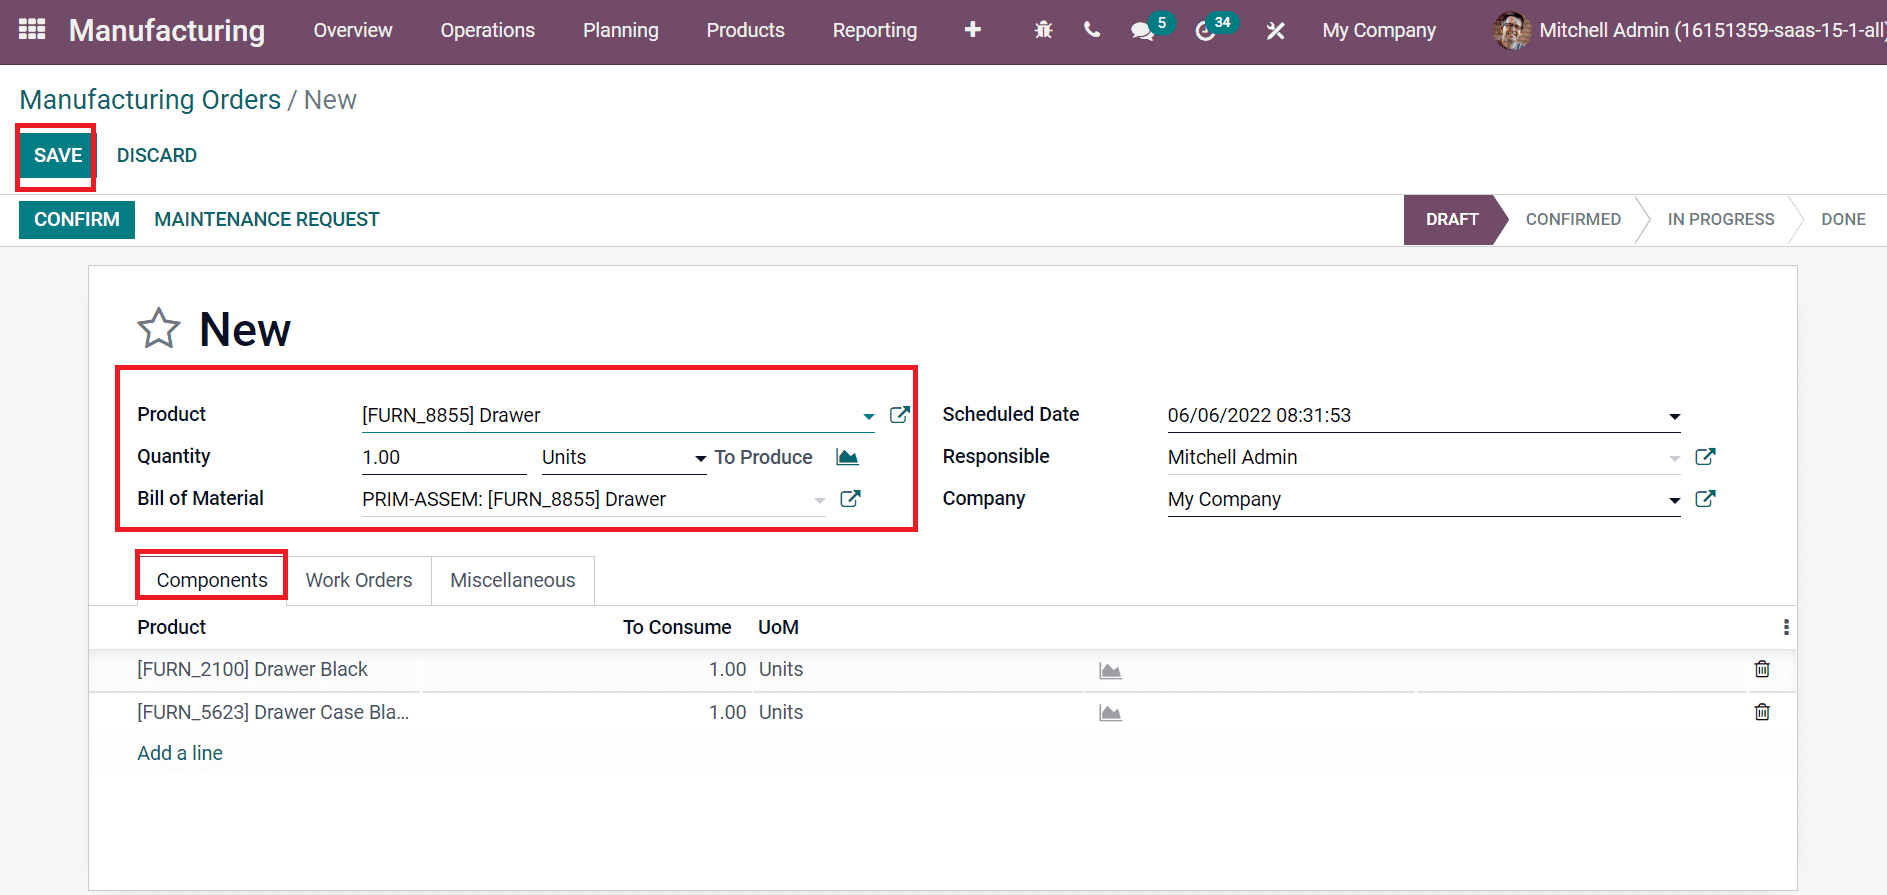 how-to-manage-scrap-orders-using-odoo-15-manufacturing-cybrosys